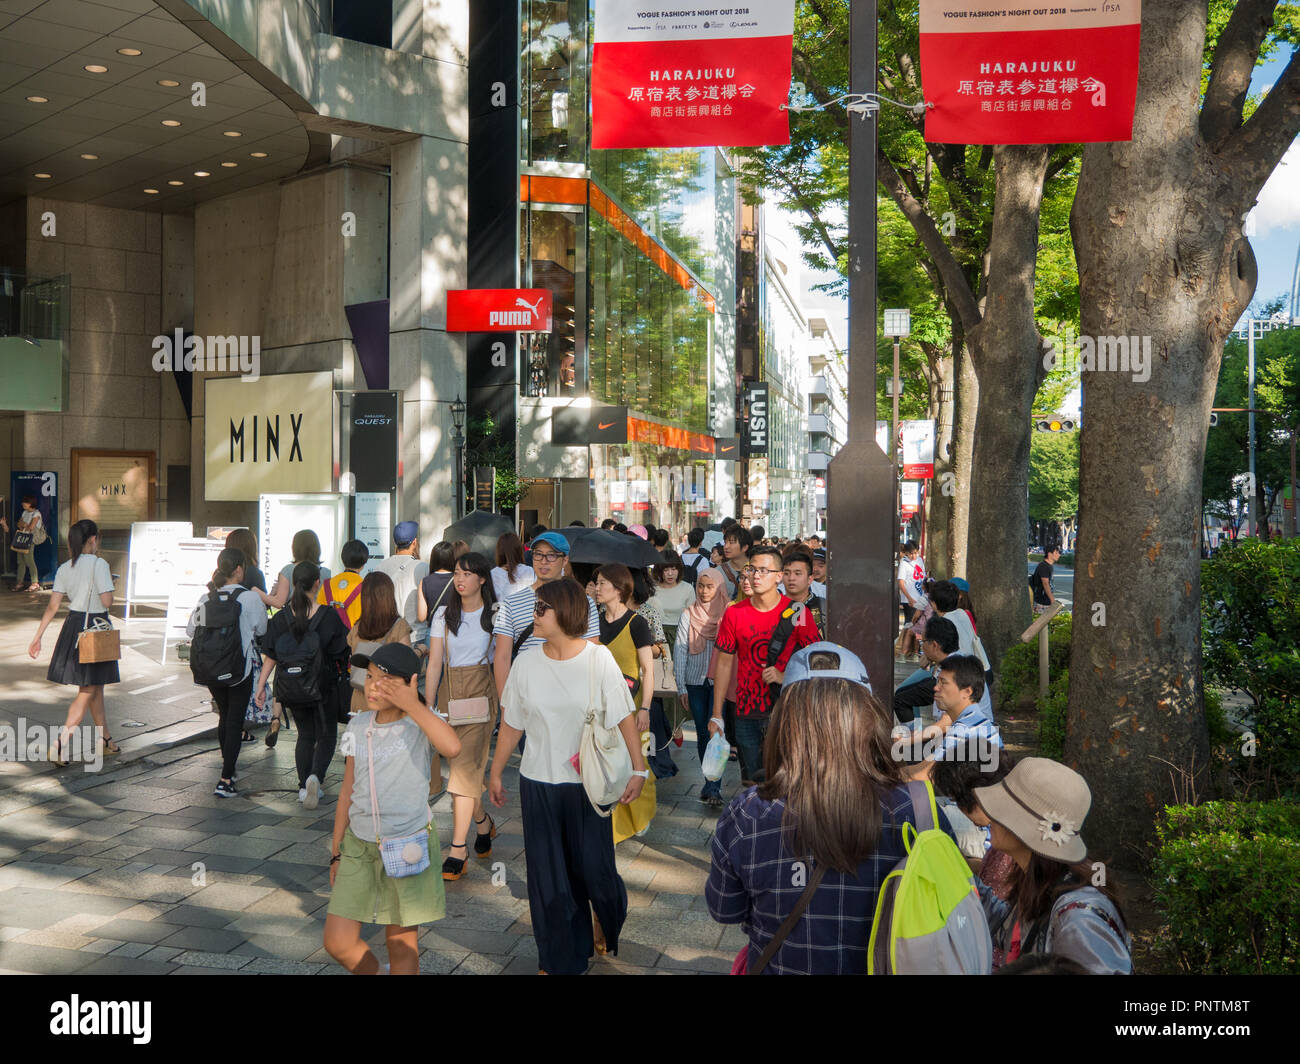 Tokyo, Japan - September 8, 2018: Unidentified people at Takeshita street  in Harajuku, famous of unique Japanese cosplay street fashion Stock Photo -  Alamy